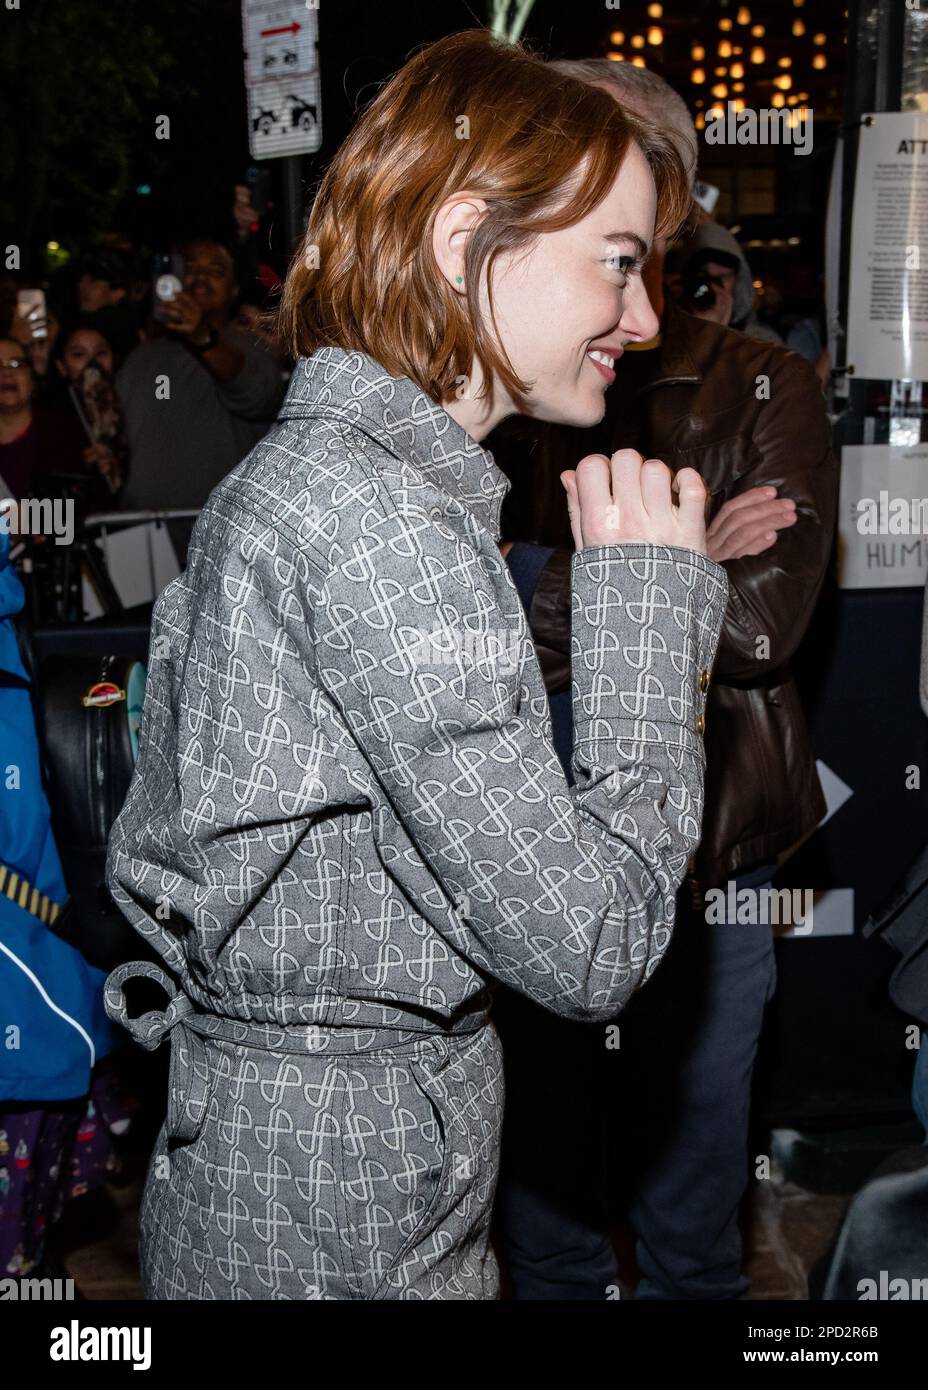 AUSTIN, TEXAS - MARCH 13: Emma Stone attends the premiere of Problemista at  the Paramount Theatre during the 2023 SXSW Conference And Festival at the  Austin Convention Center on March 13, 2023